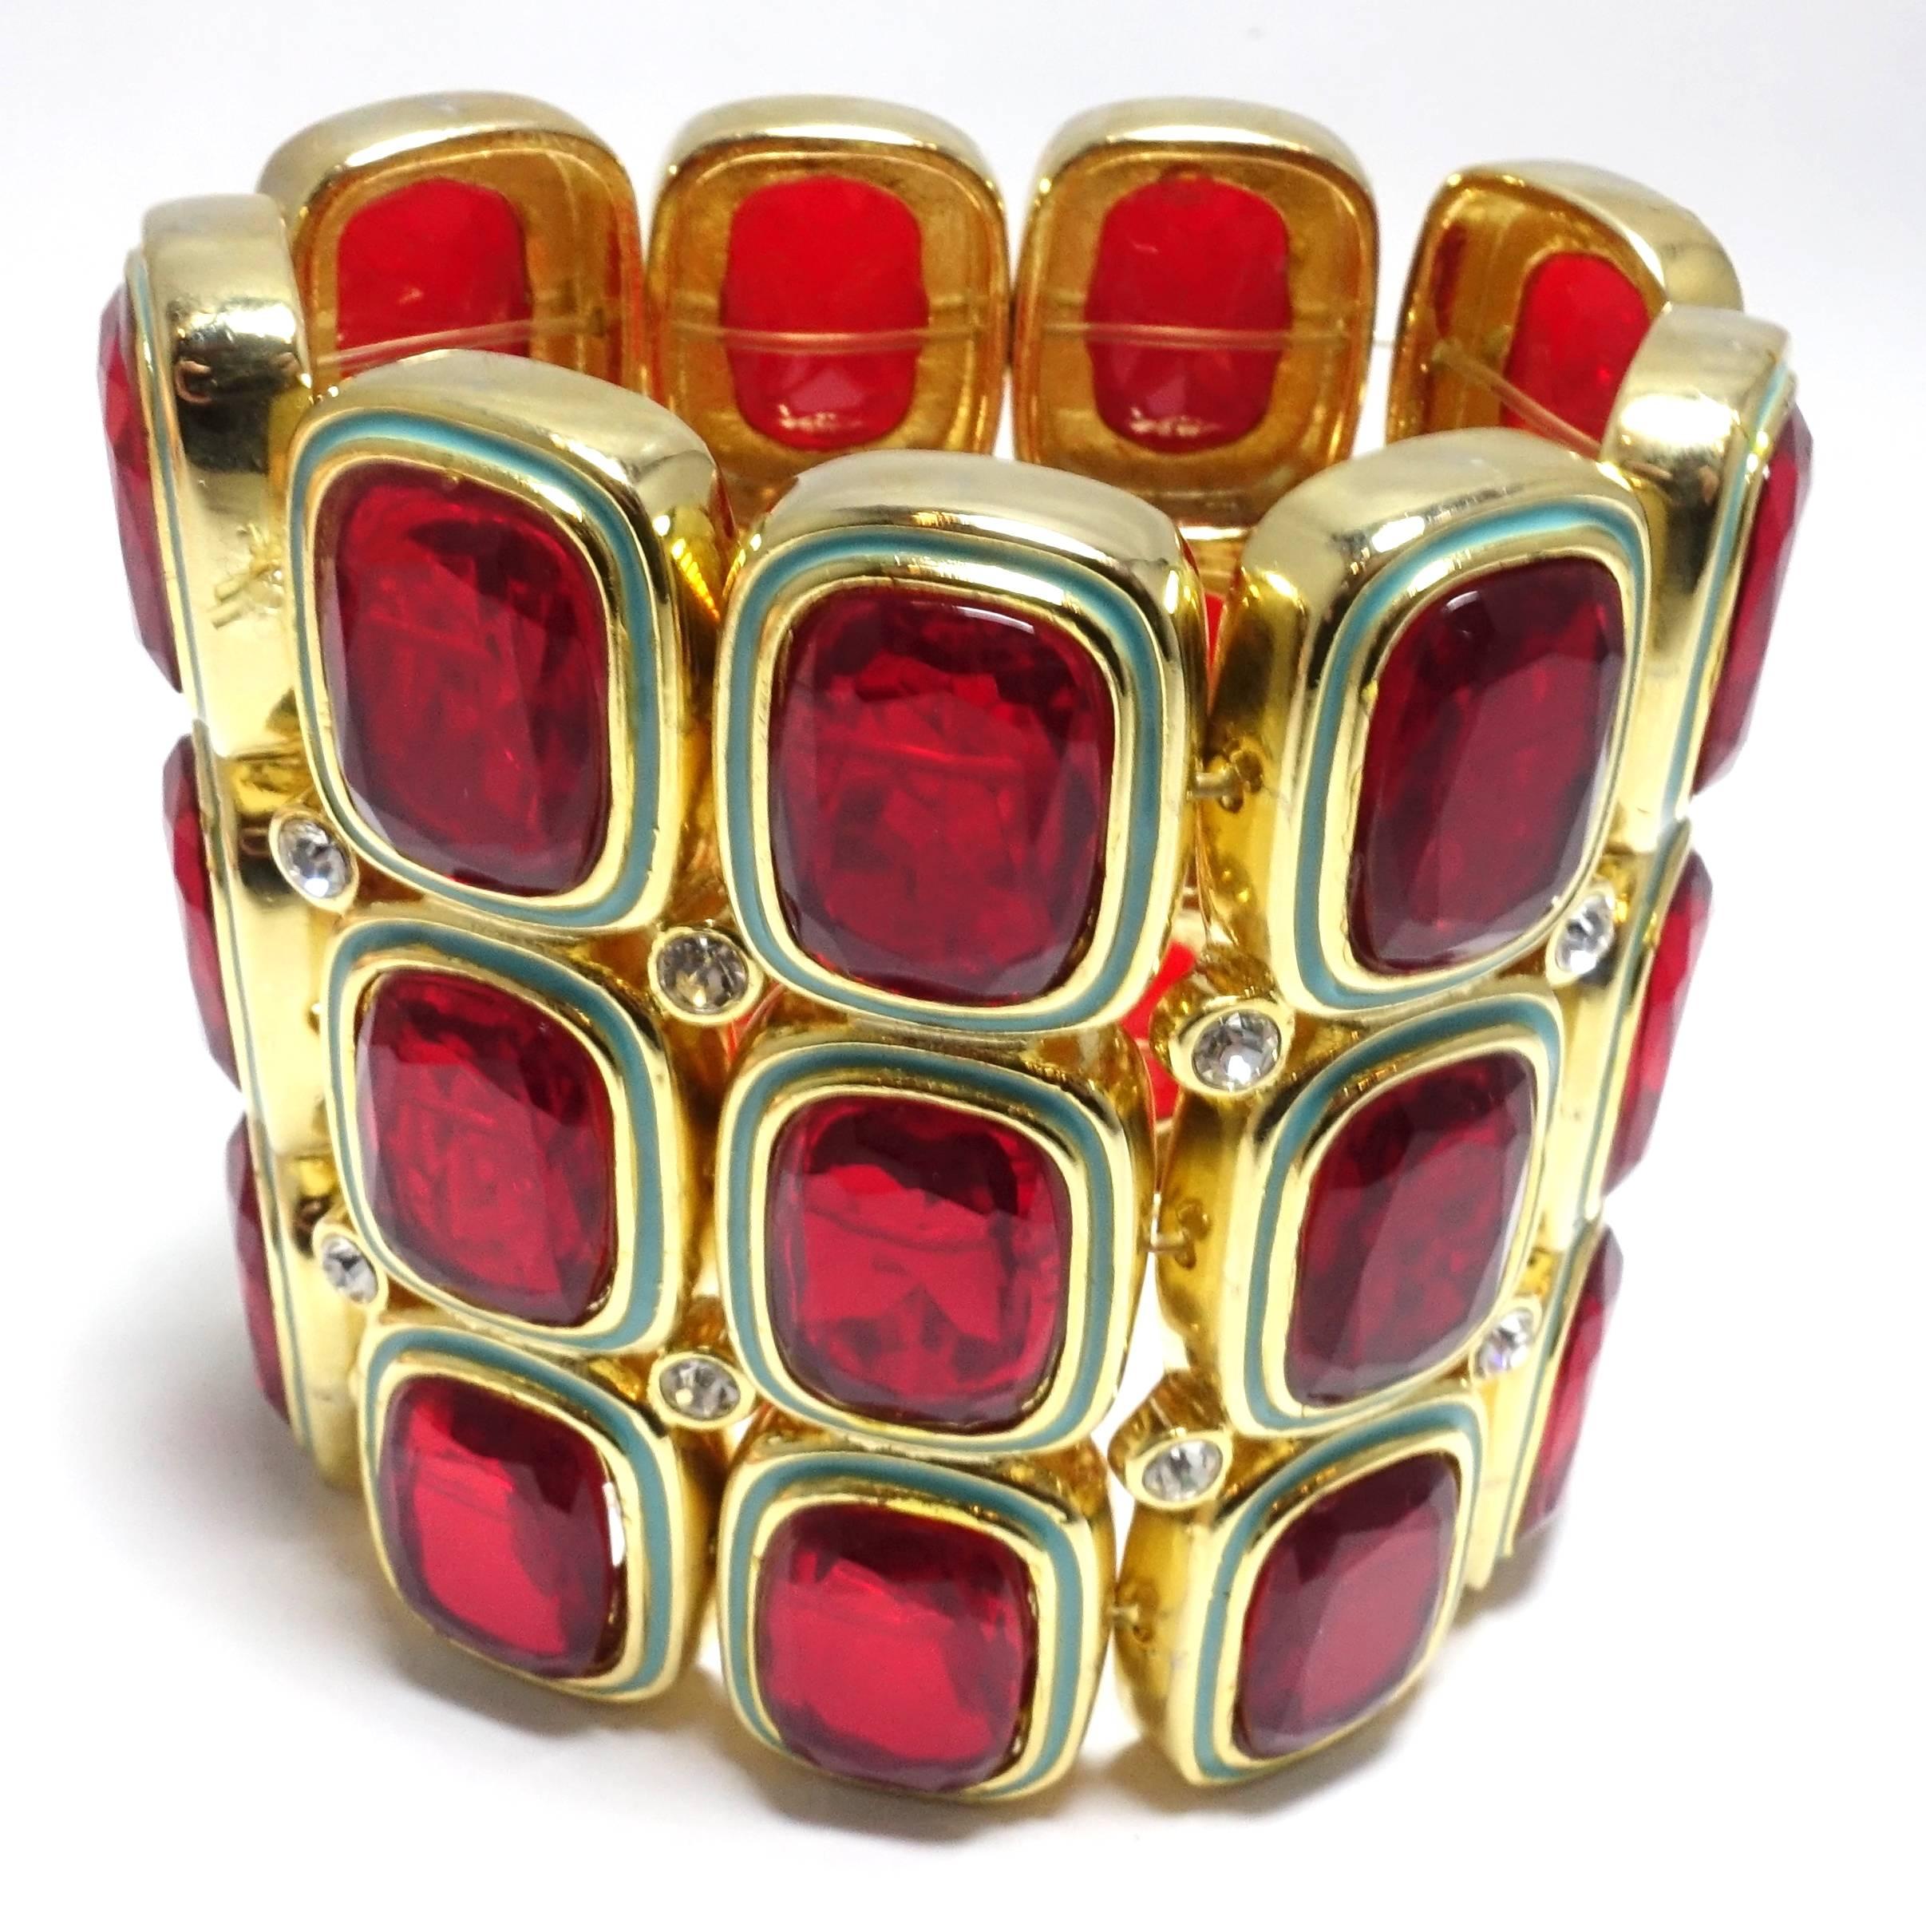 This wide Kenneth Jay Lane stretch bracelet is designed with faux rubies and clear rhinestones with turquoise enameling on the borders.  It is made with a gold tone metal setting.  This bracelet measures 6-1/2” around the inside x 2-7/8” and is